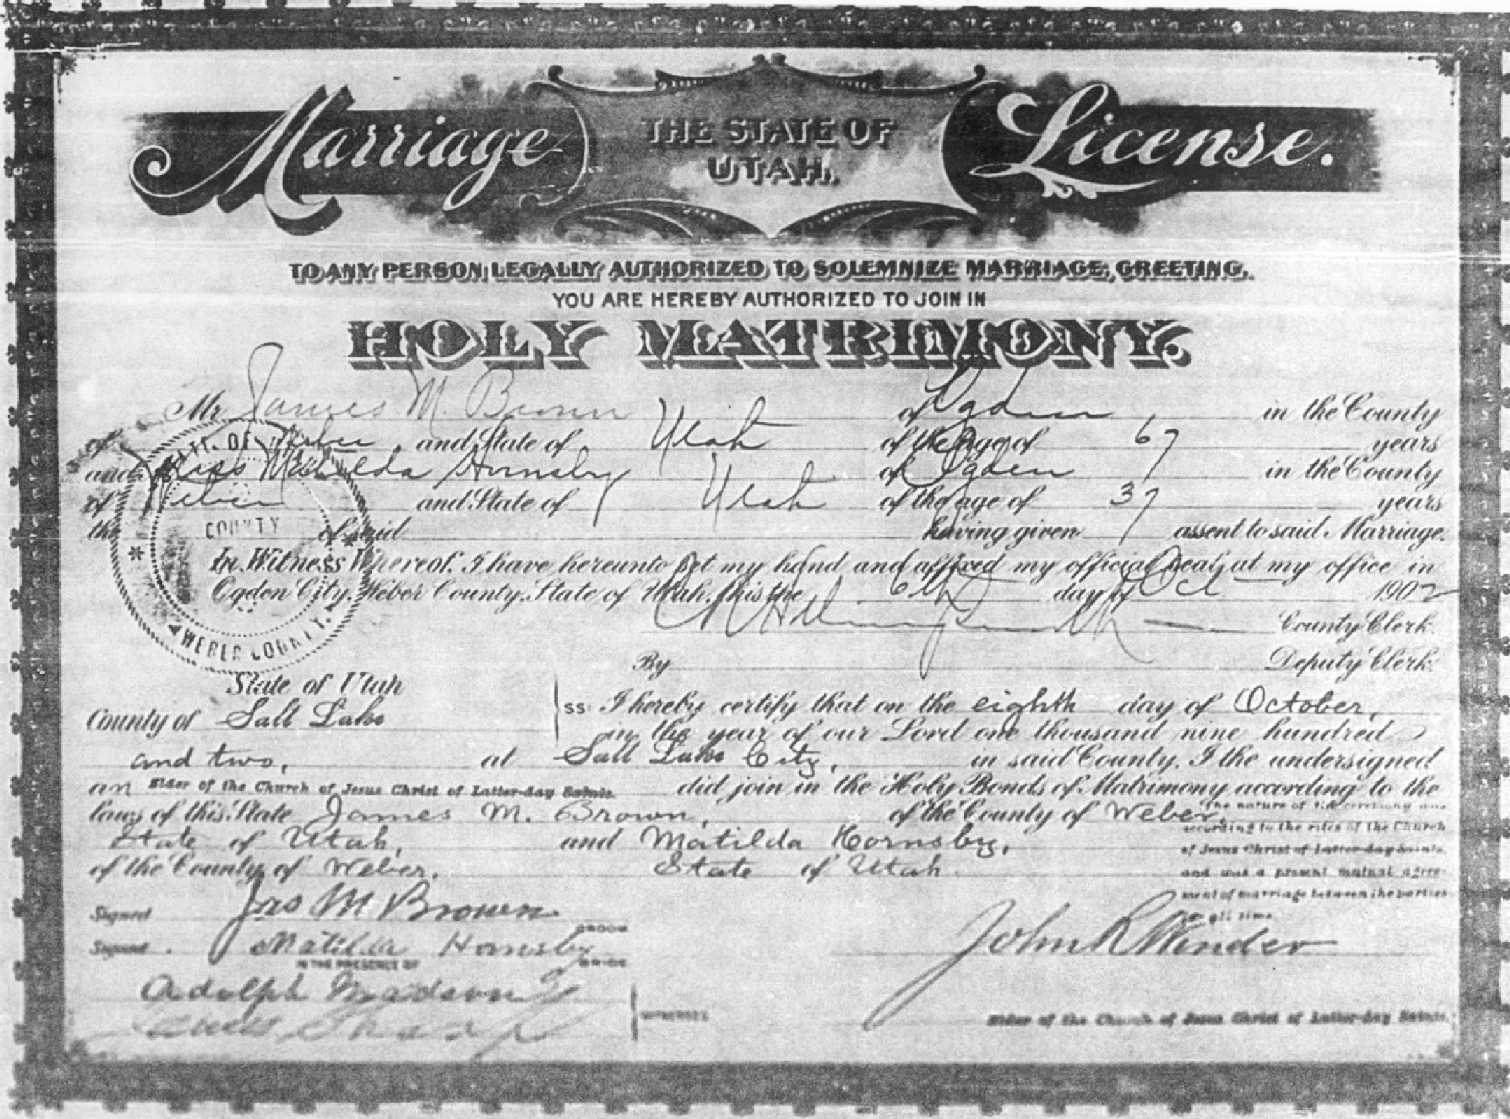 James Morehead Brown and second wife, Tillie Hornsby's wedding certificate